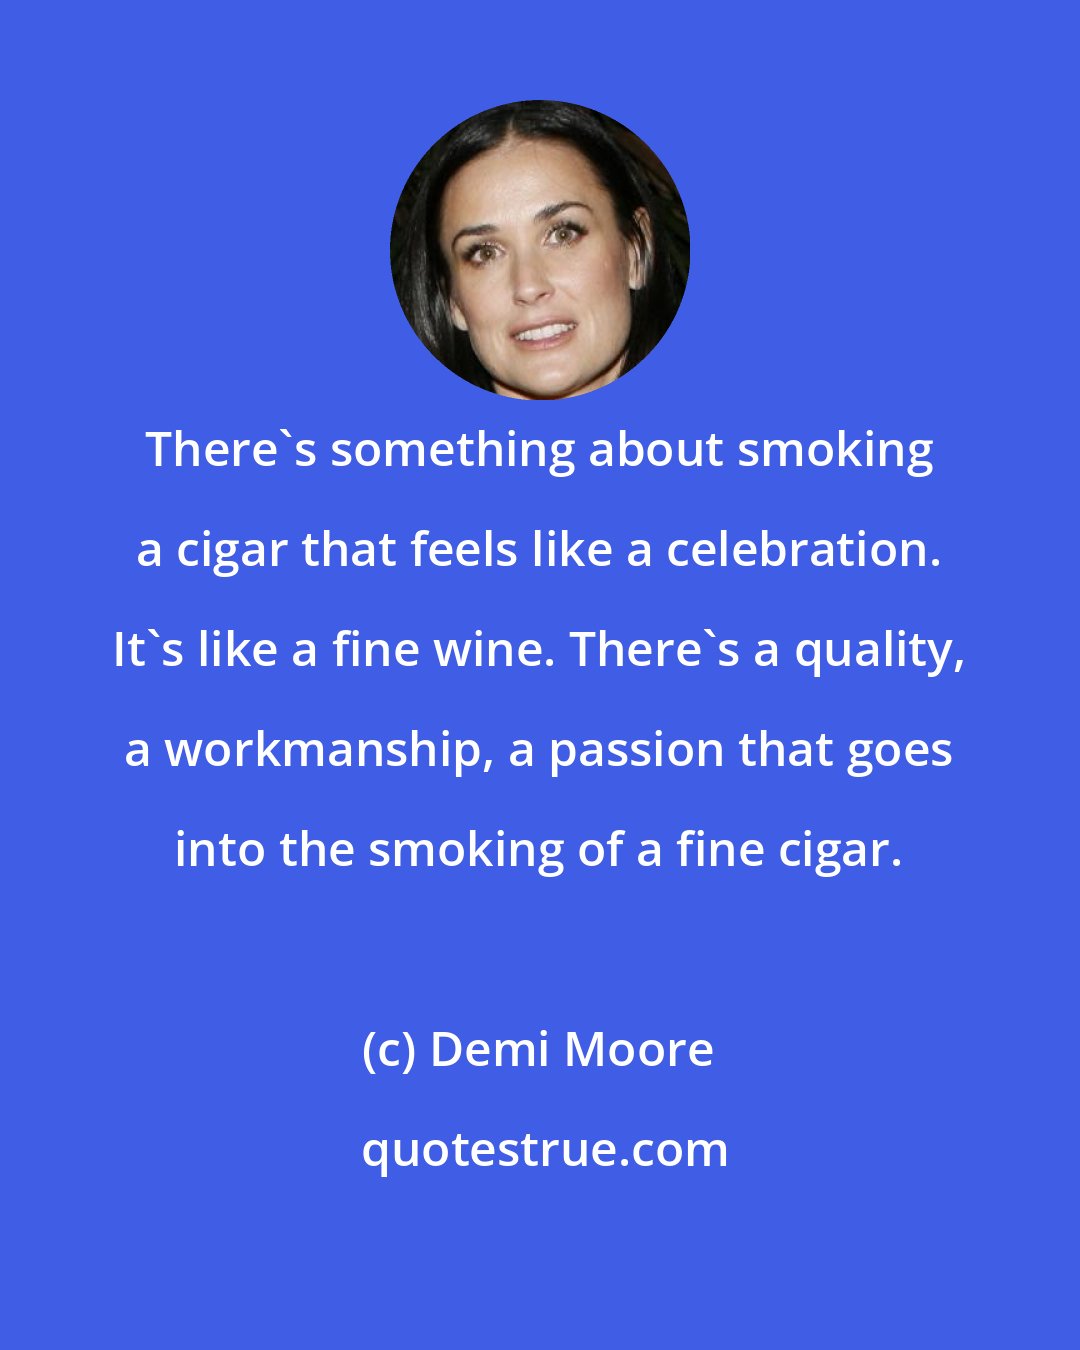 Demi Moore: There's something about smoking a cigar that feels like a celebration. It's like a fine wine. There's a quality, a workmanship, a passion that goes into the smoking of a fine cigar.